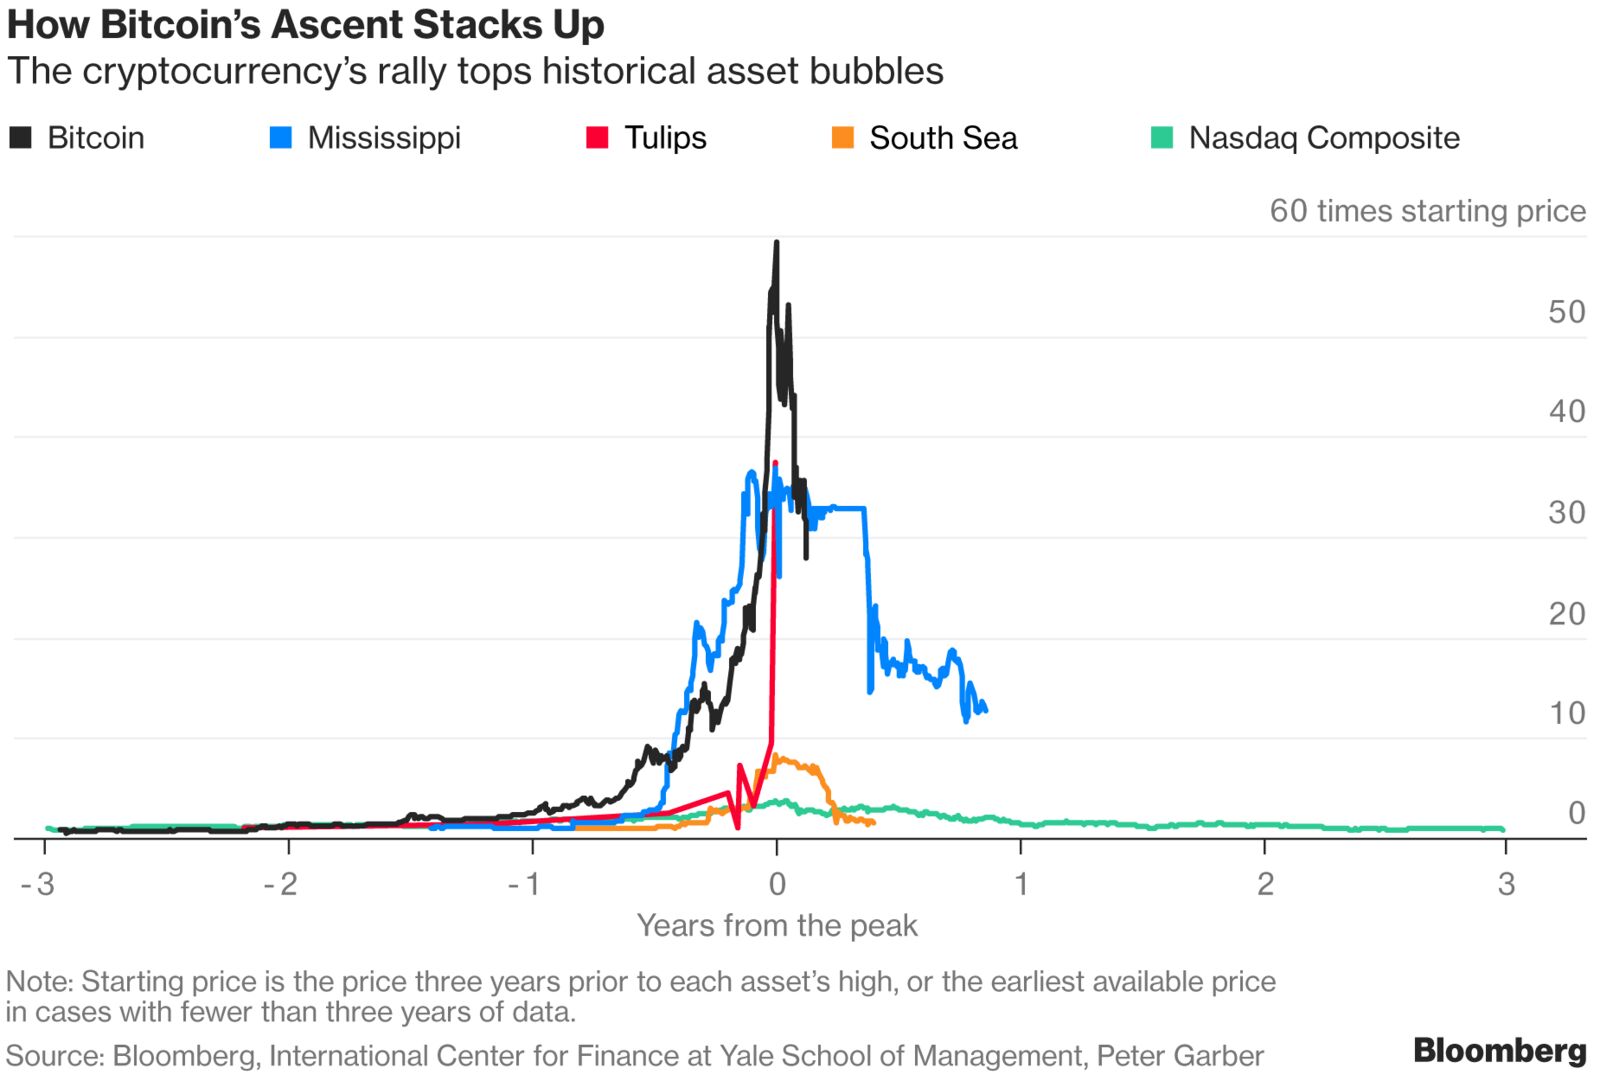 Chart of Bitcoin vs other historical asset price bubbles